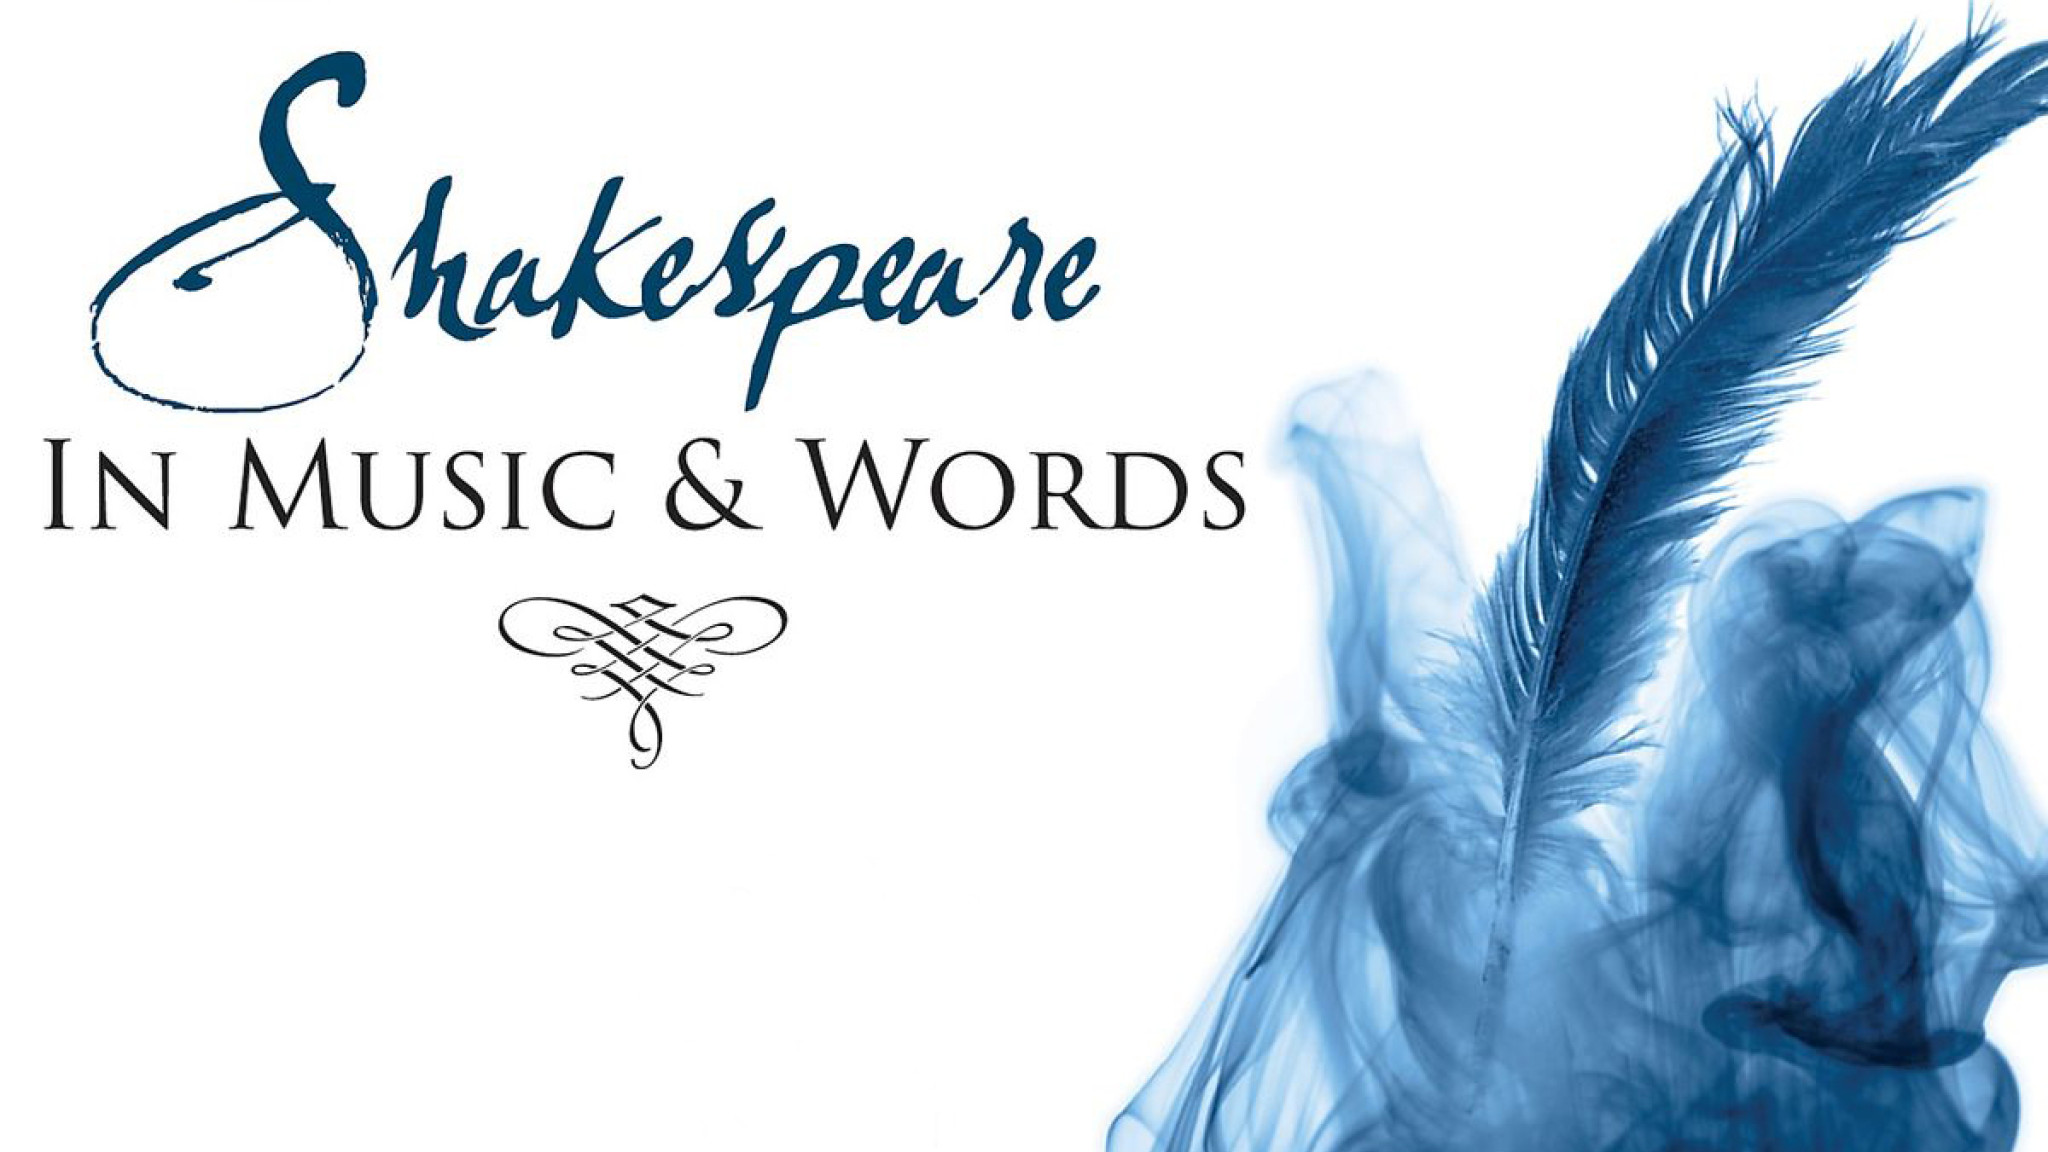 Shakespeare In Music & Words